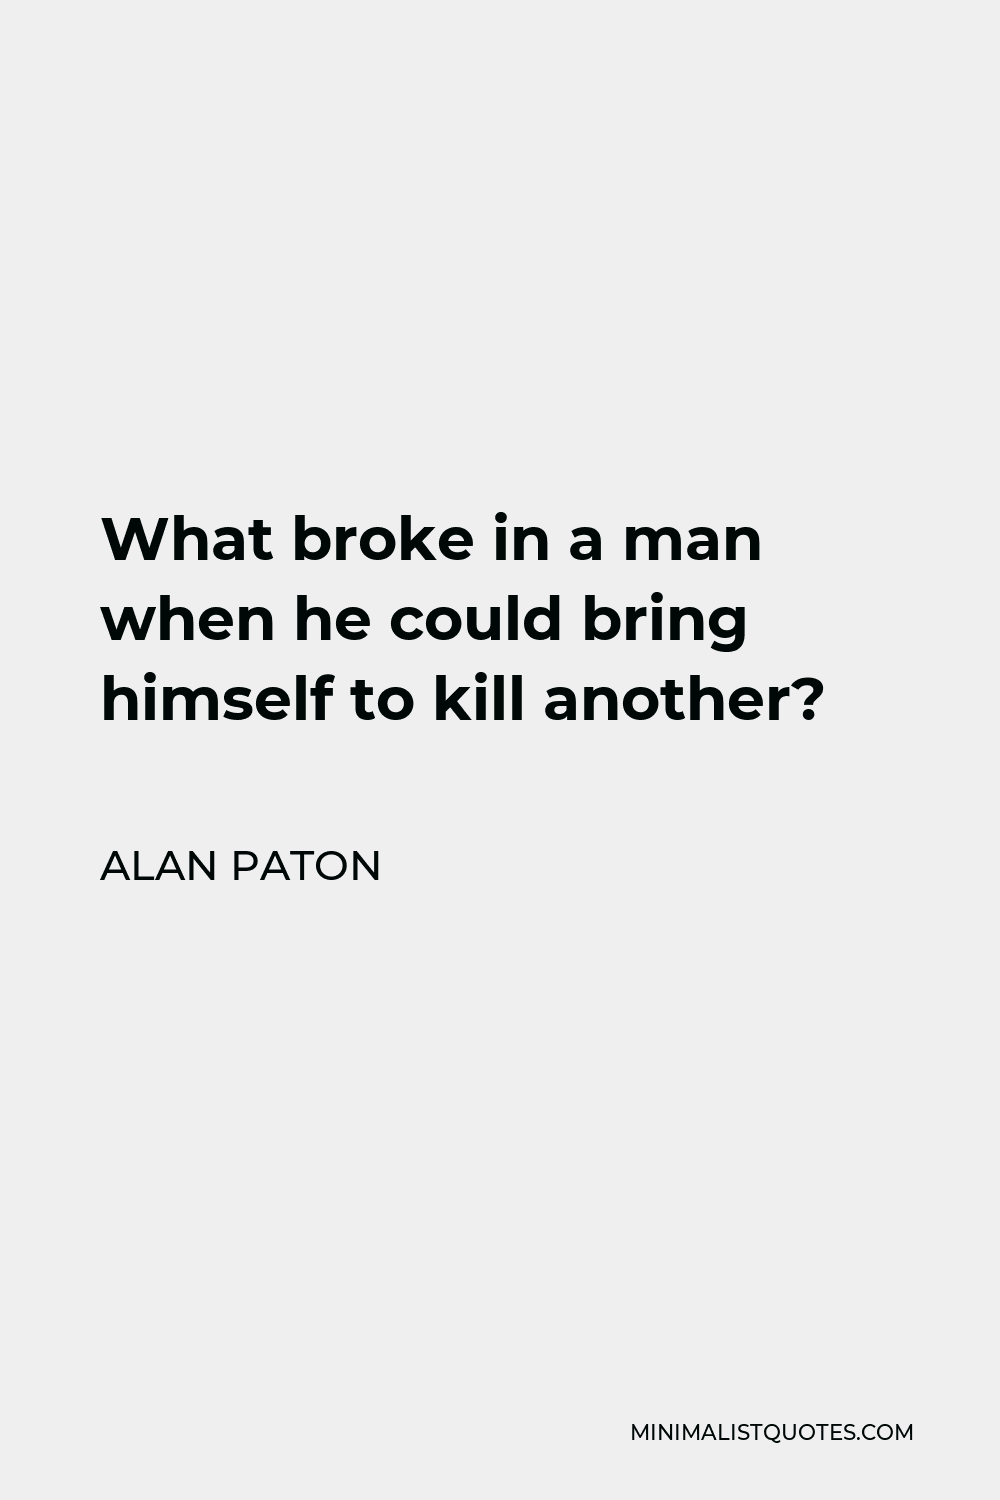 Alan Paton Quote - What broke in a man when he could bring himself to kill another?